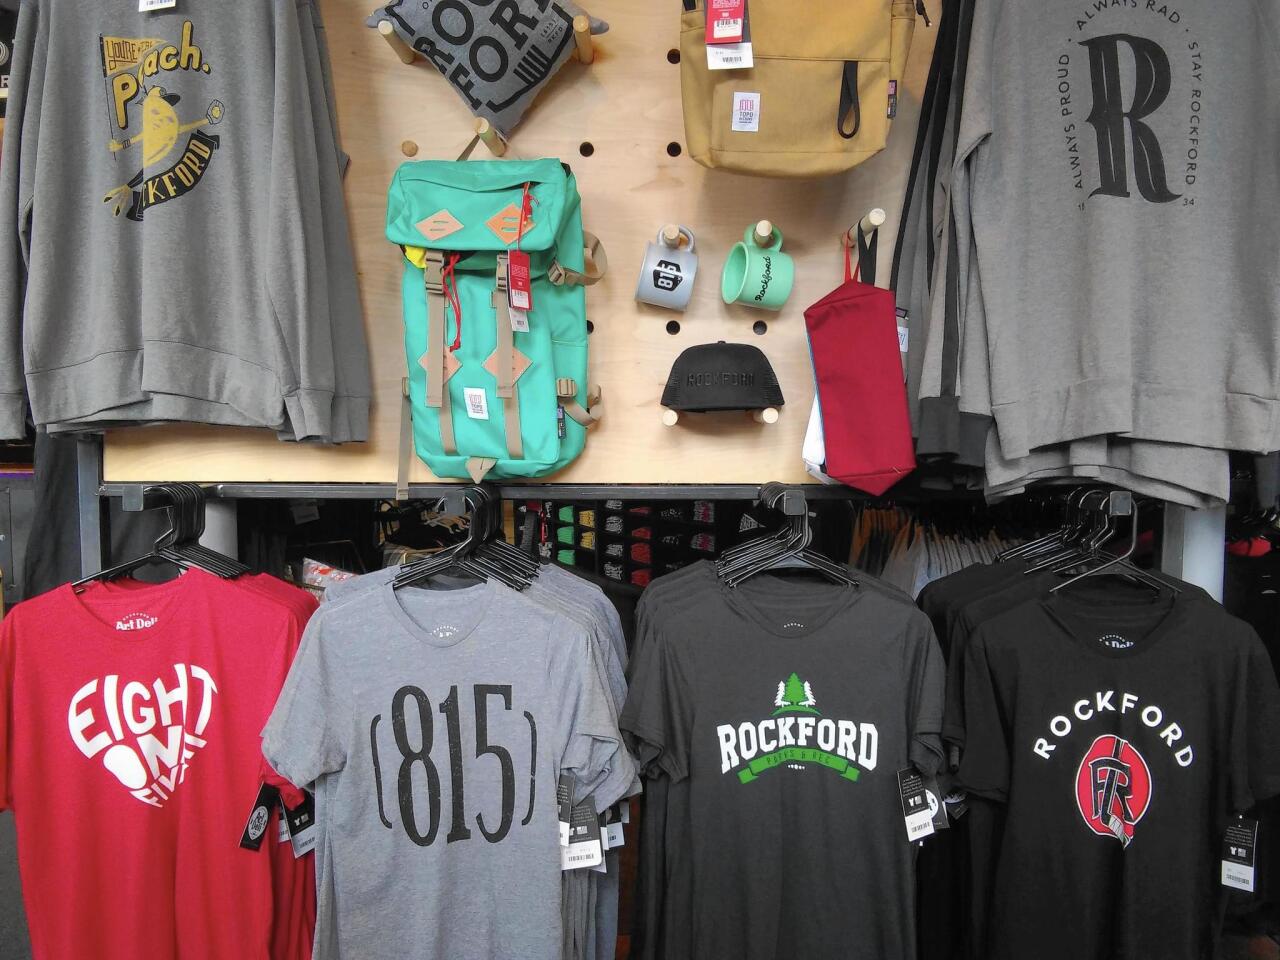 Downtown’s Rockford Art Deli has just about every Rockford-themed souvenir you could want.